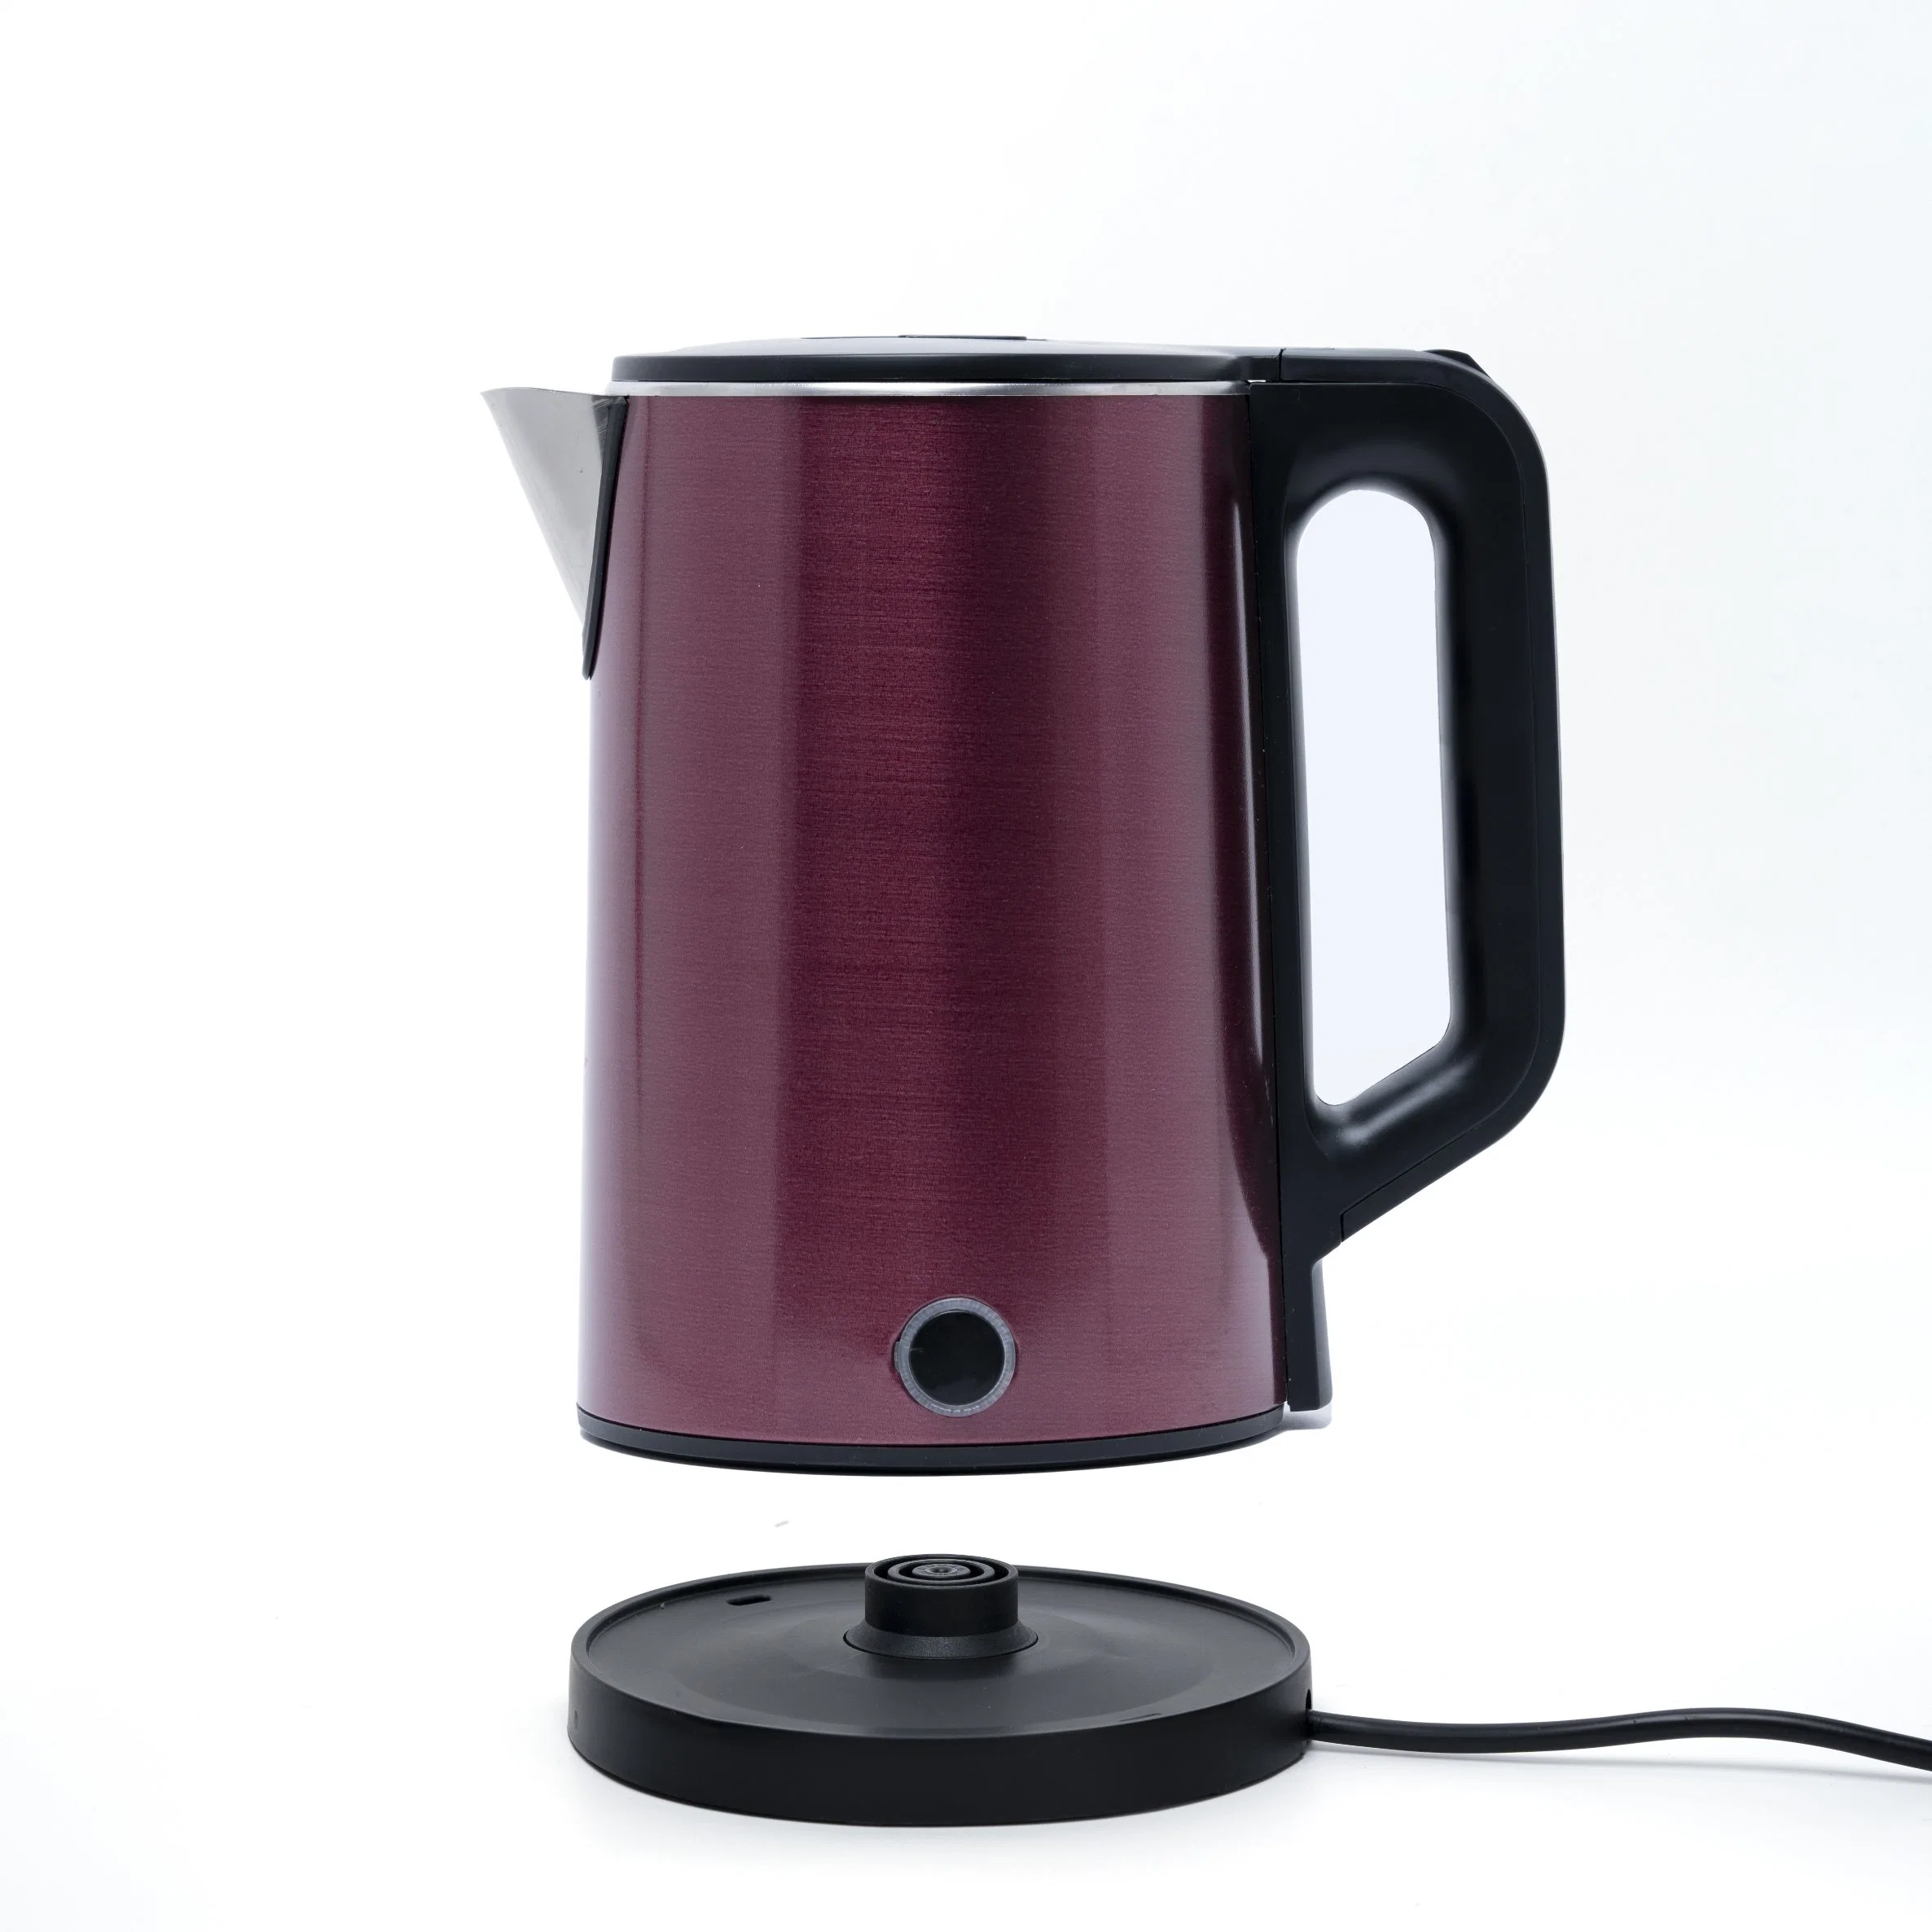 Factory Price 1.8L Color Stainless Steel Electric Kettle Water Pot Electric Appliance for Home Hotel